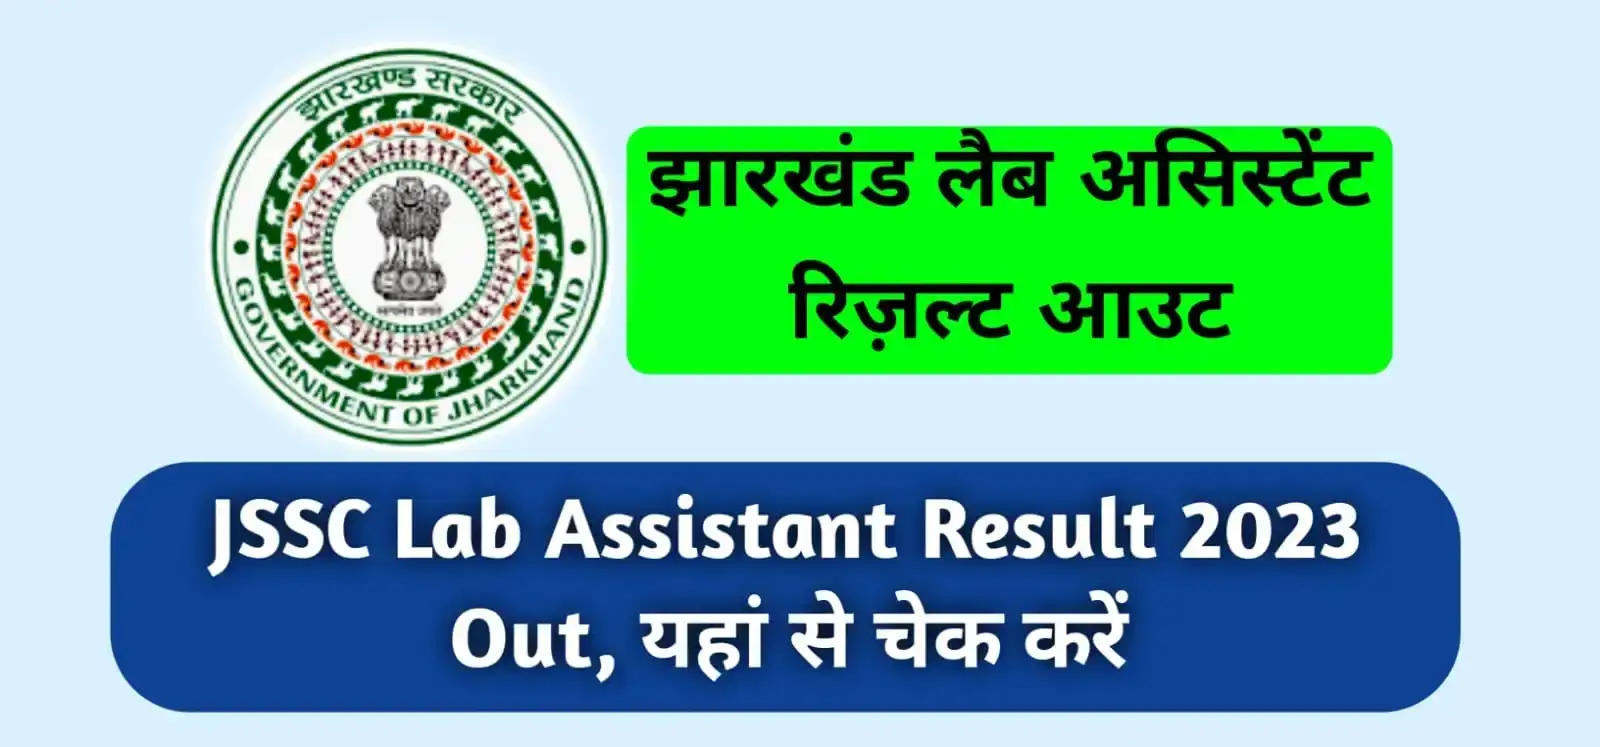 JSSC Lab Assistant Result 2023 Out: Check Merit List at jssc.nic.in 